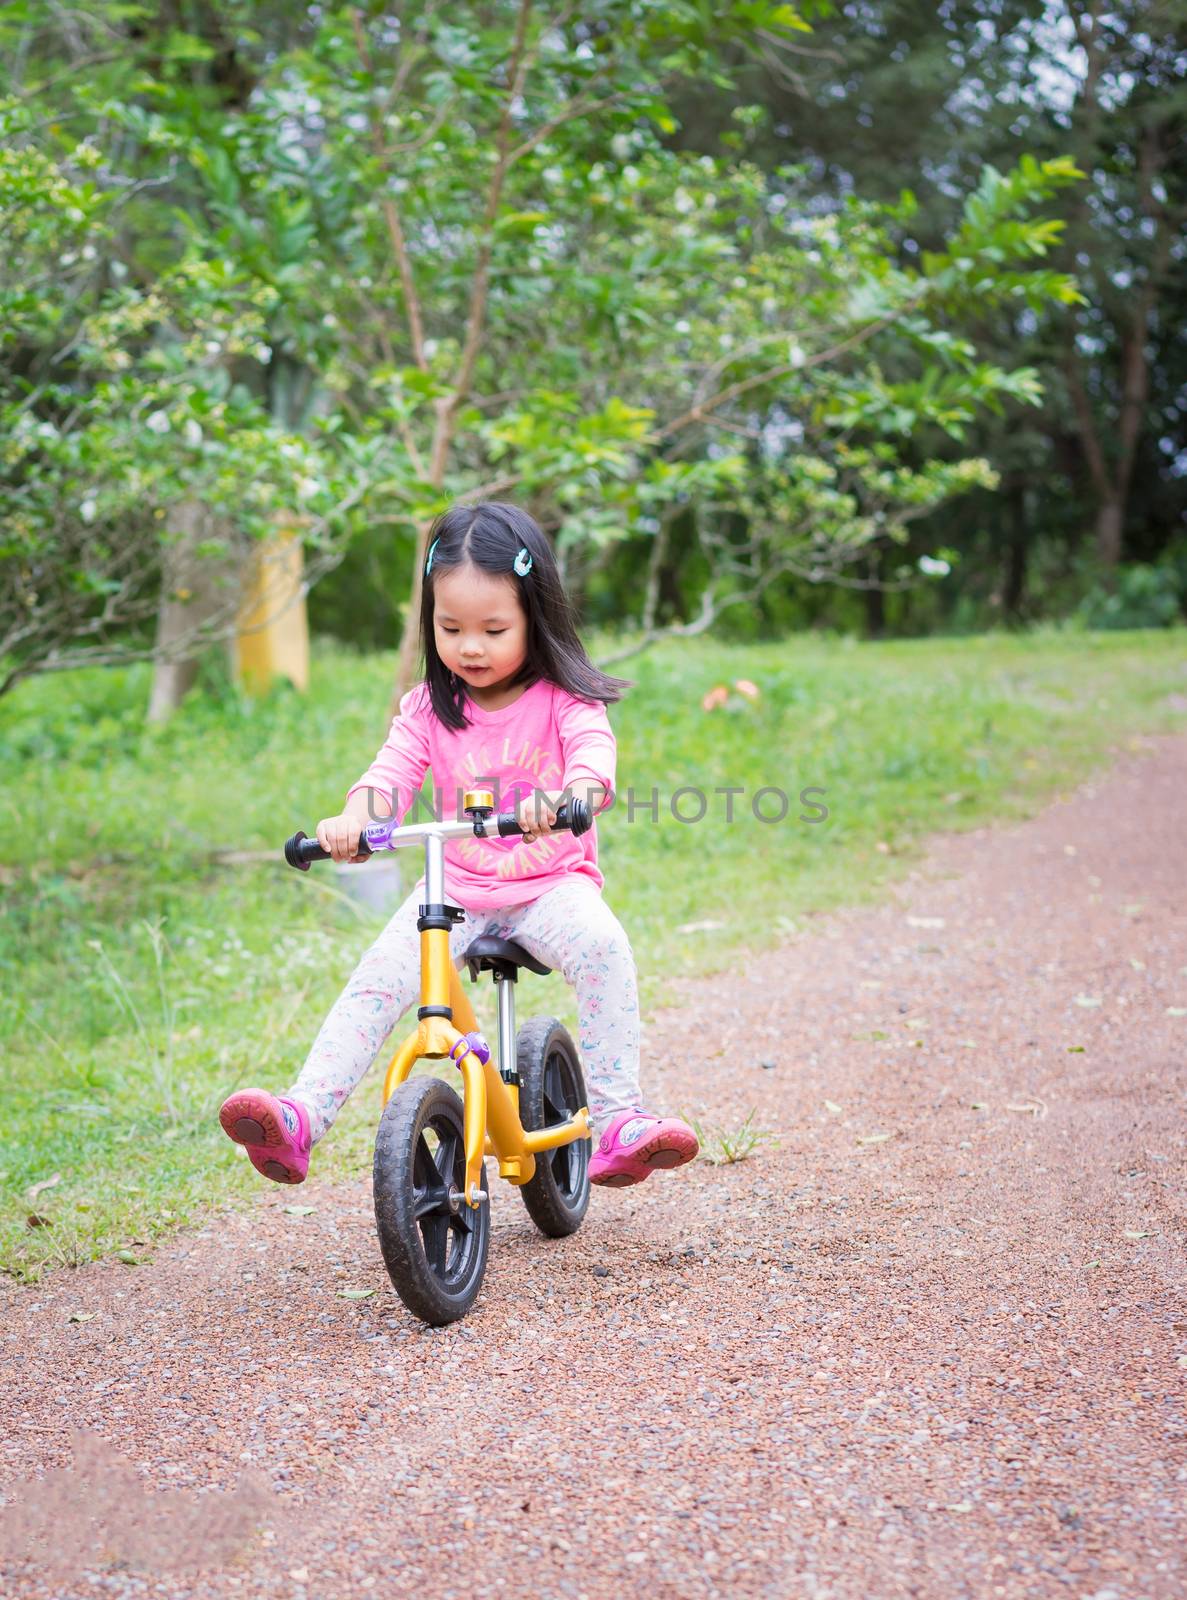 Little girl learns to riding balance bike on slope in the park by domonite